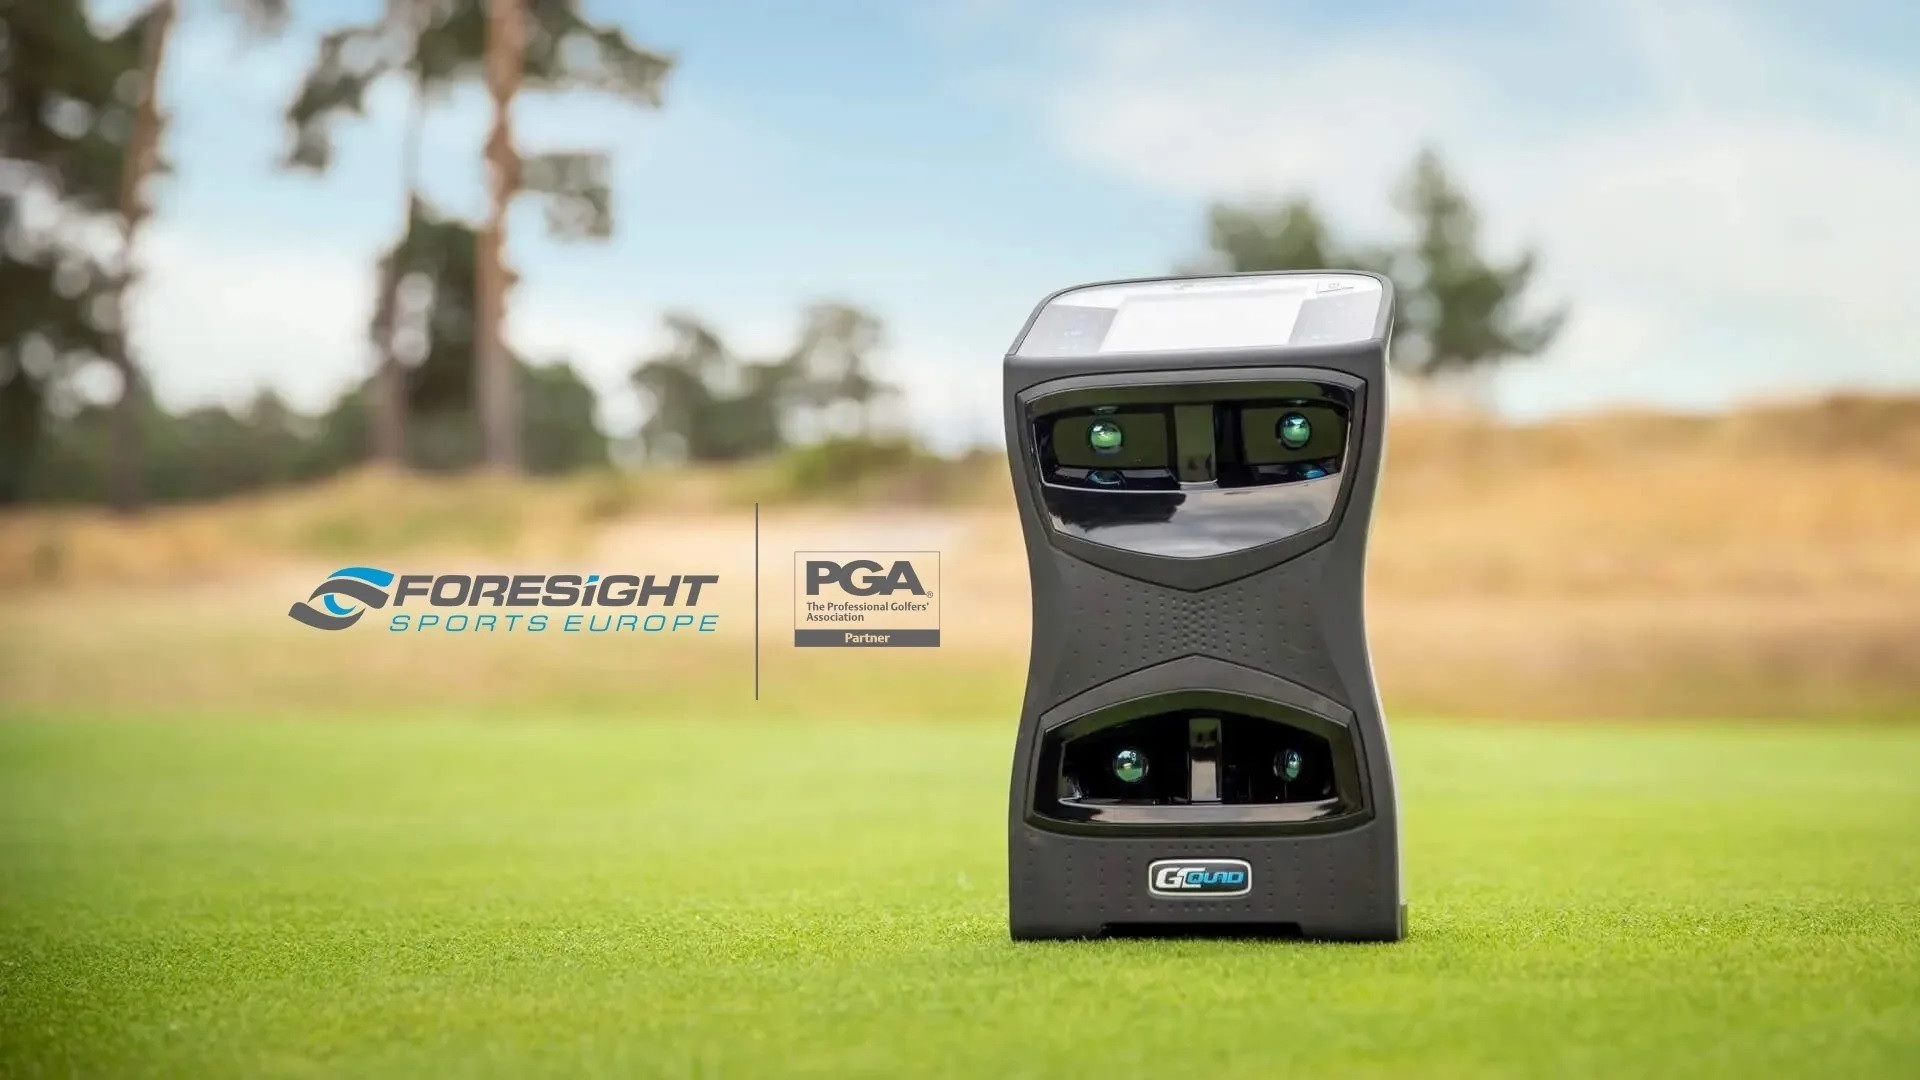 Foresight Sports Europe has secured a partnership with the PGA ©Foresight Sports Europe